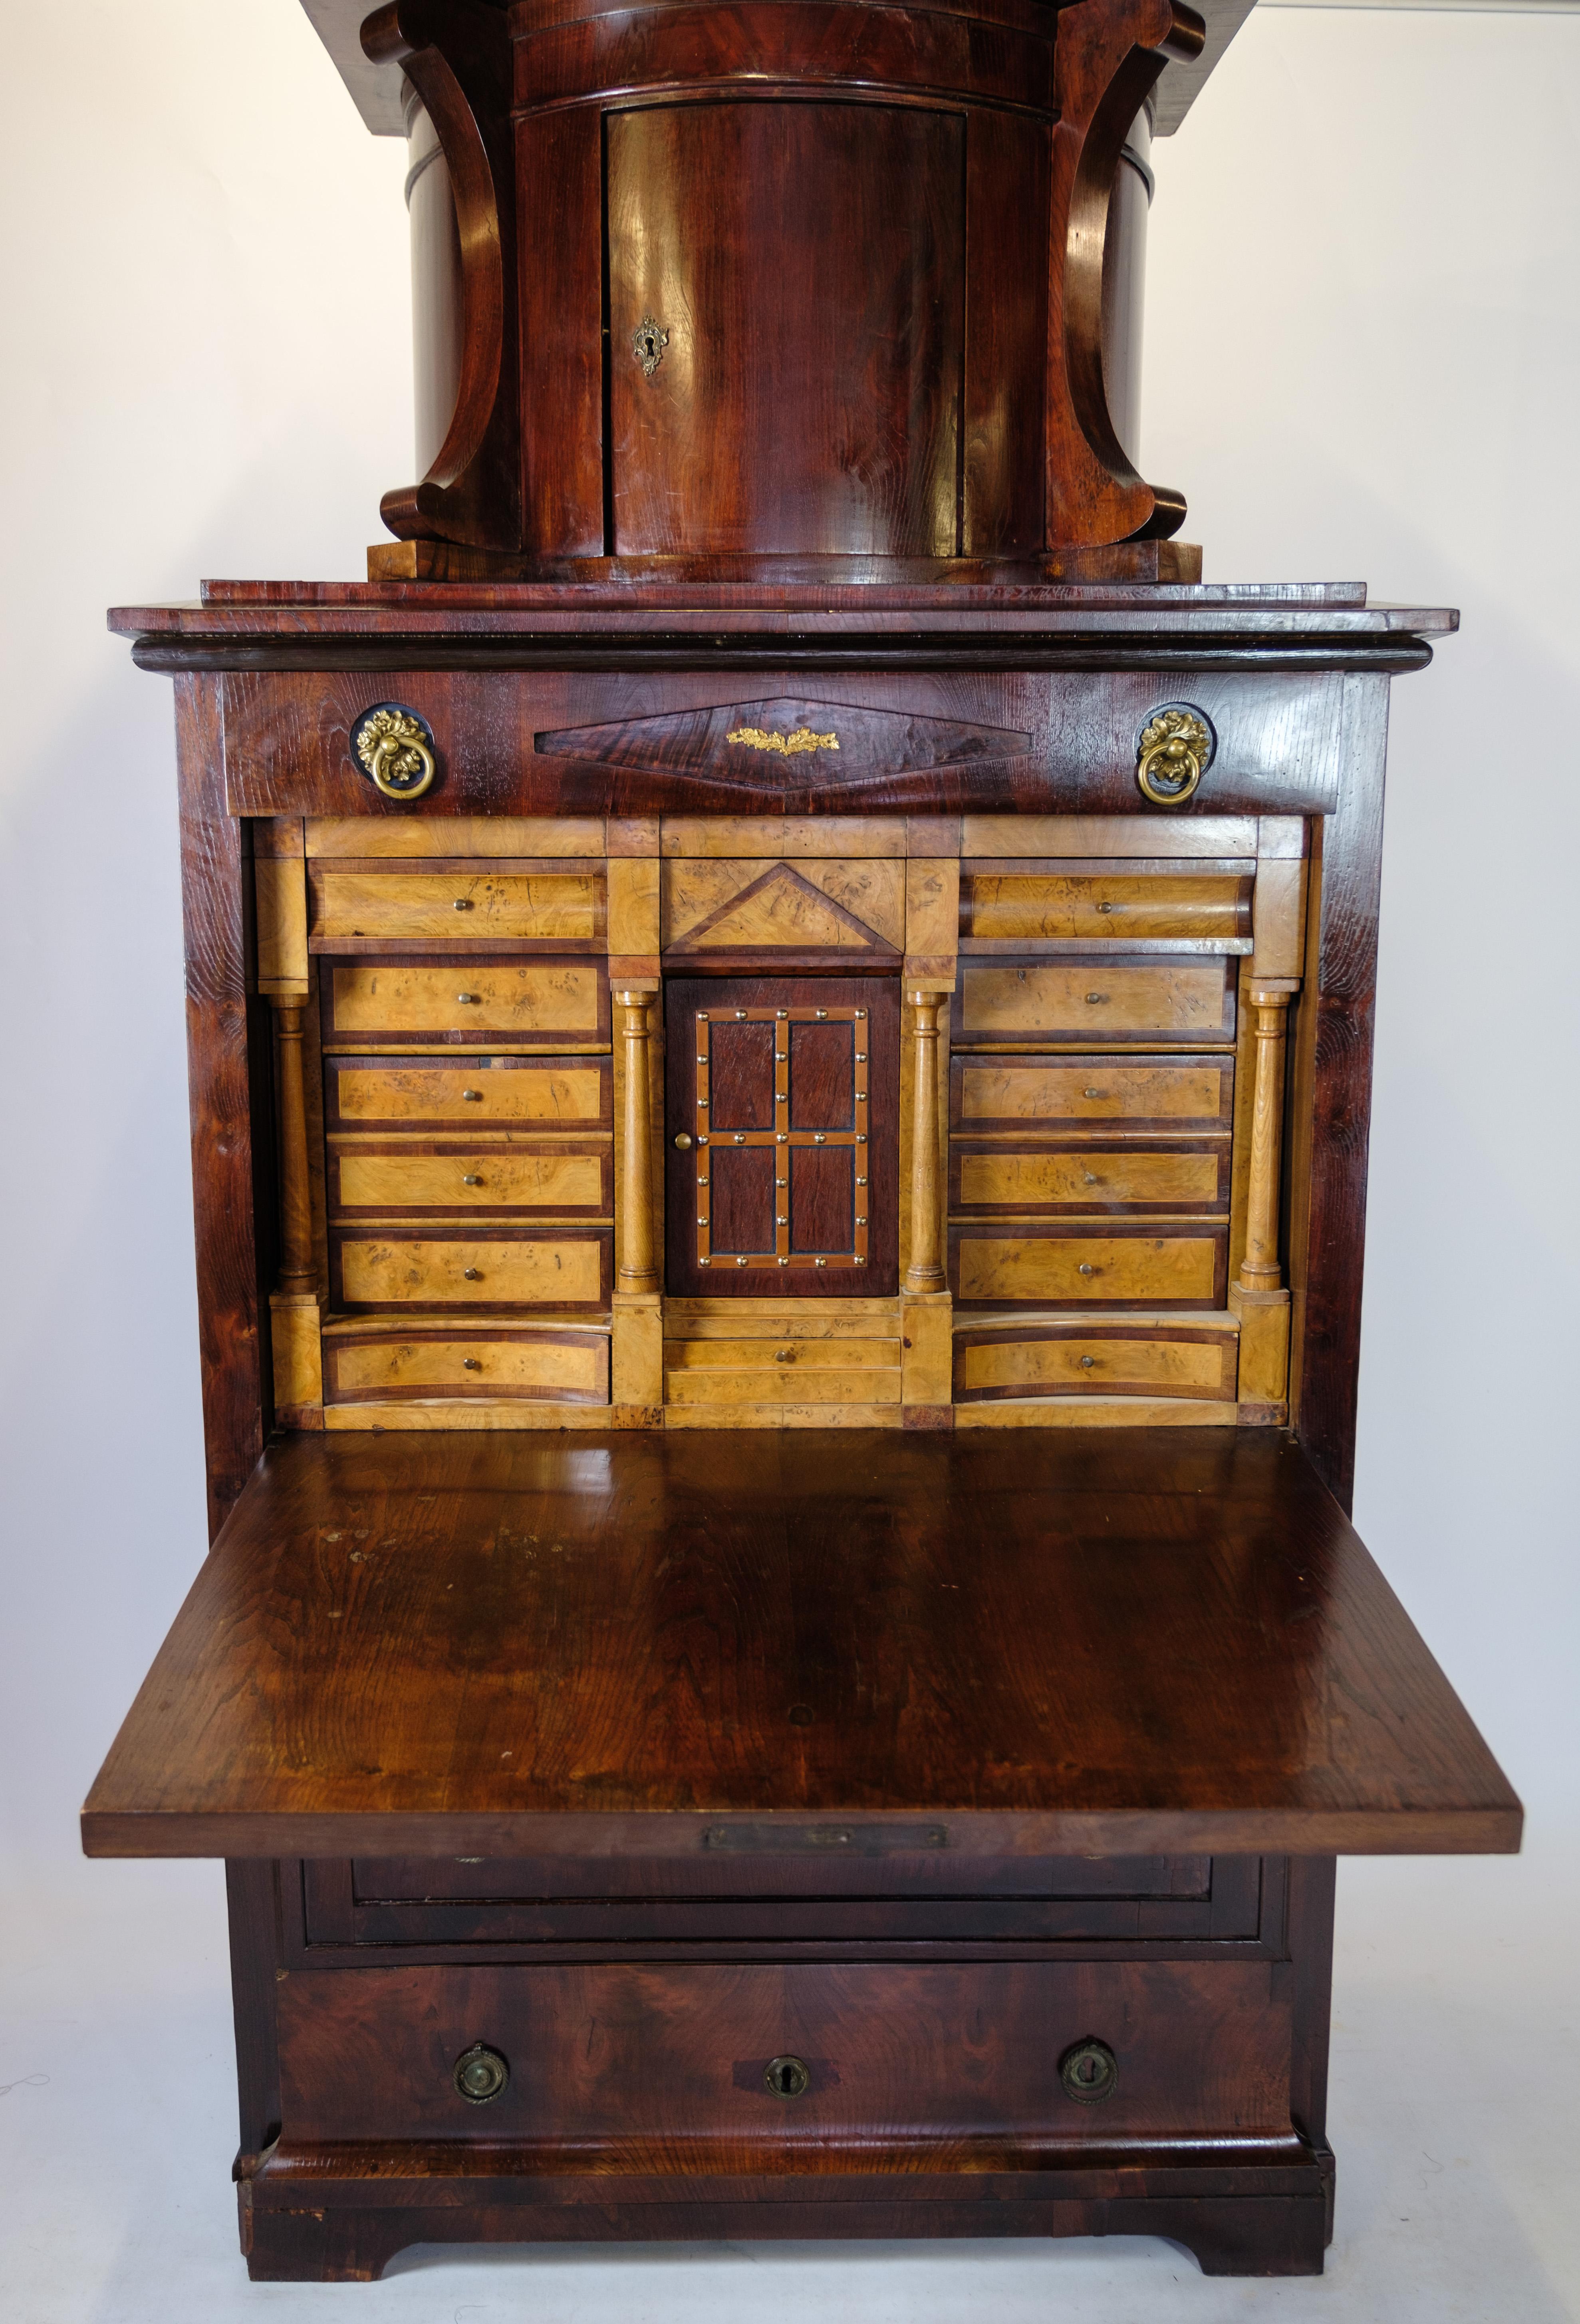 German secretary of patinated elm wood with top and brass fittings decorated with marquetry from Berlin around the 1840s.
Dimensions in cm: H:207.5 W:106 D:50